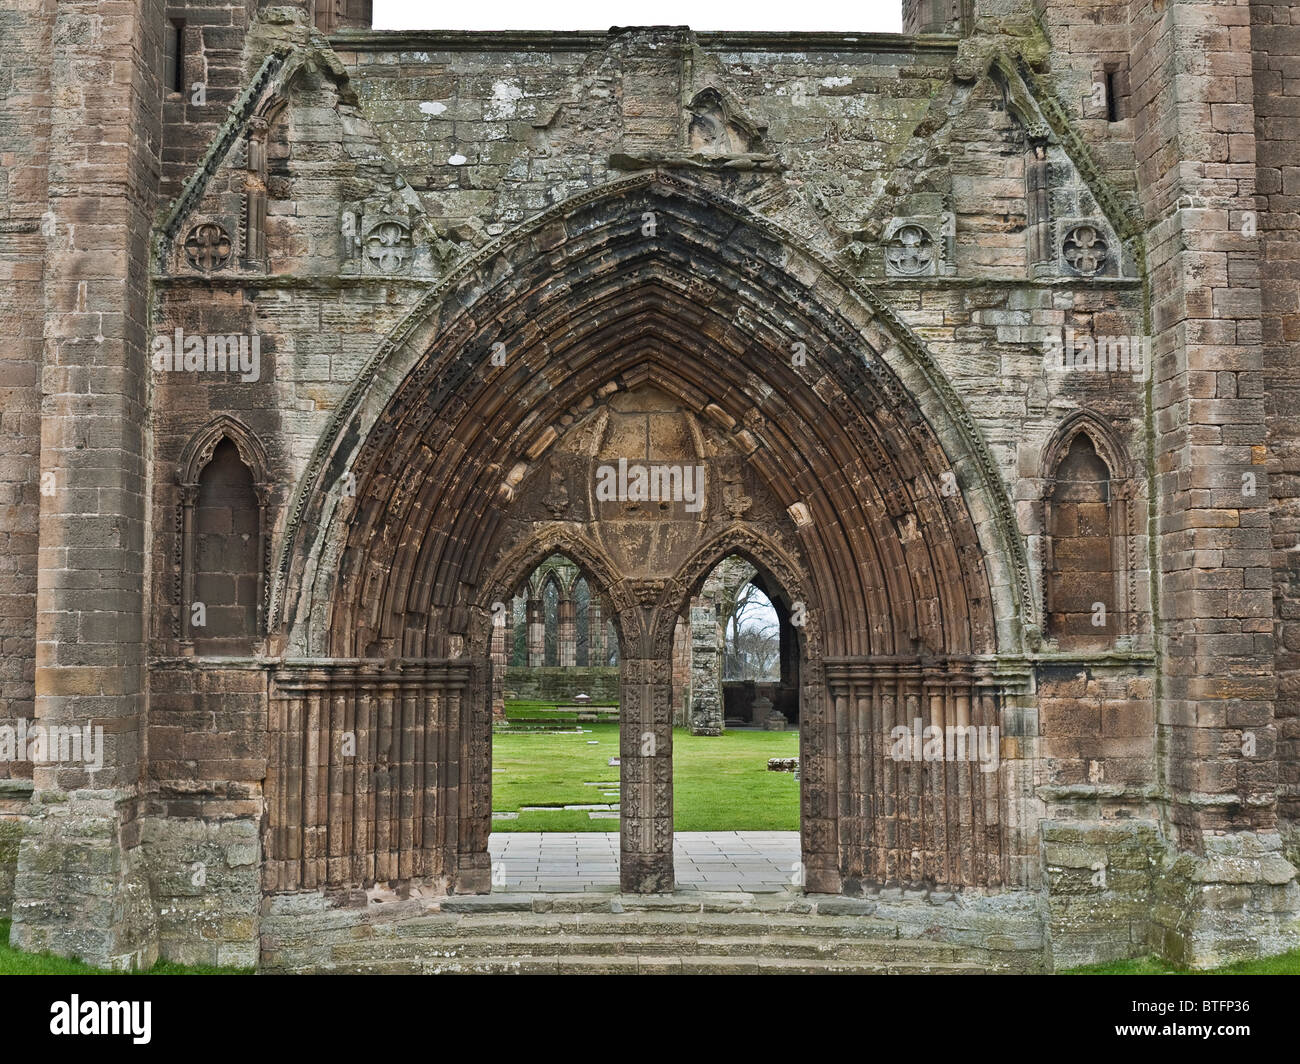 Detail of entrance, Elgin Cathedral 'The Lantern of the North' Elgin, Scotland, UK Stock Photo